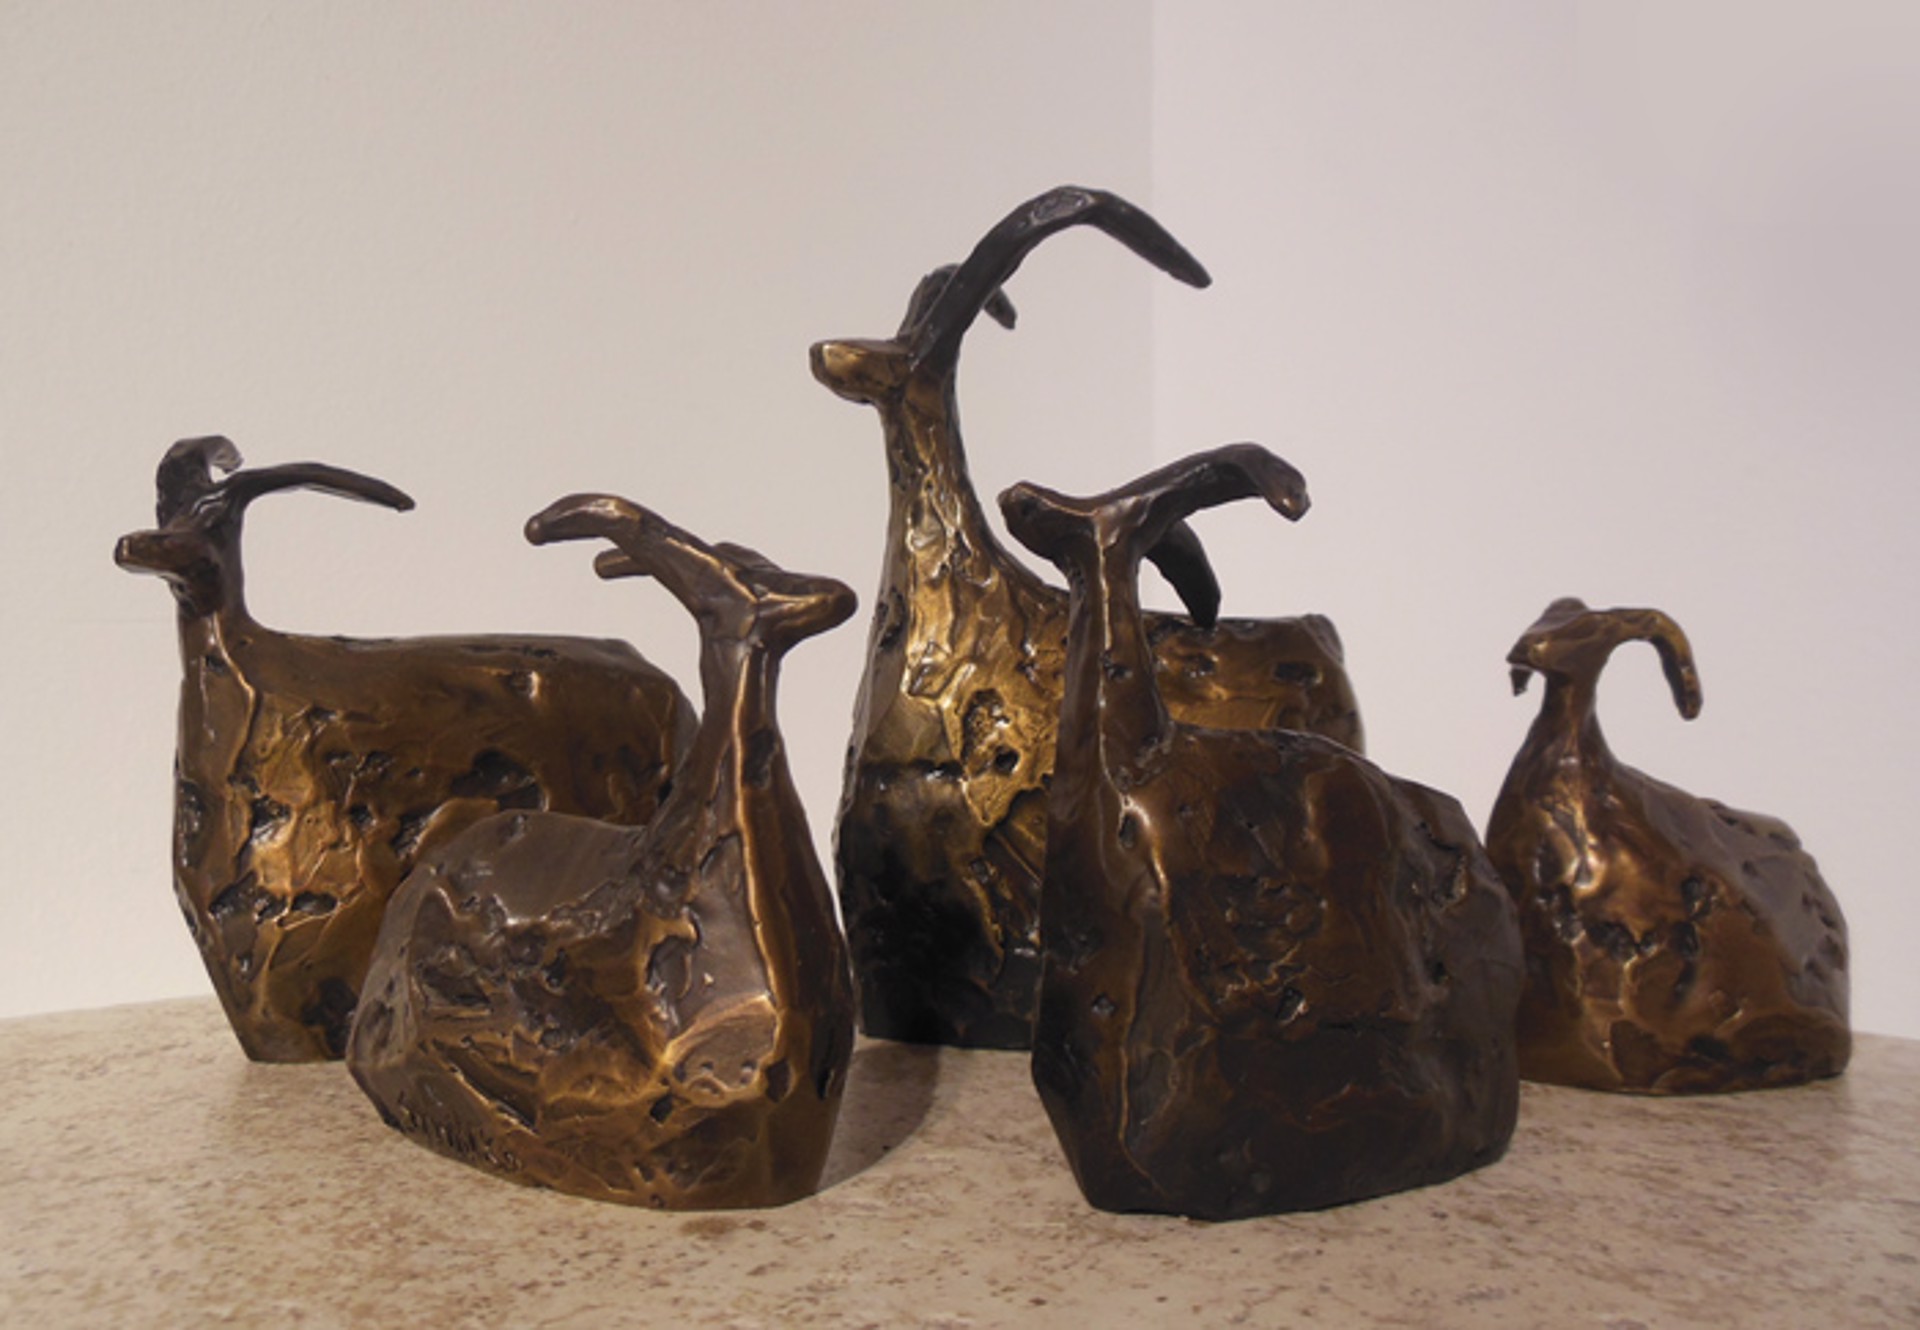 Seated Flock - Small by Jill Shwaiko